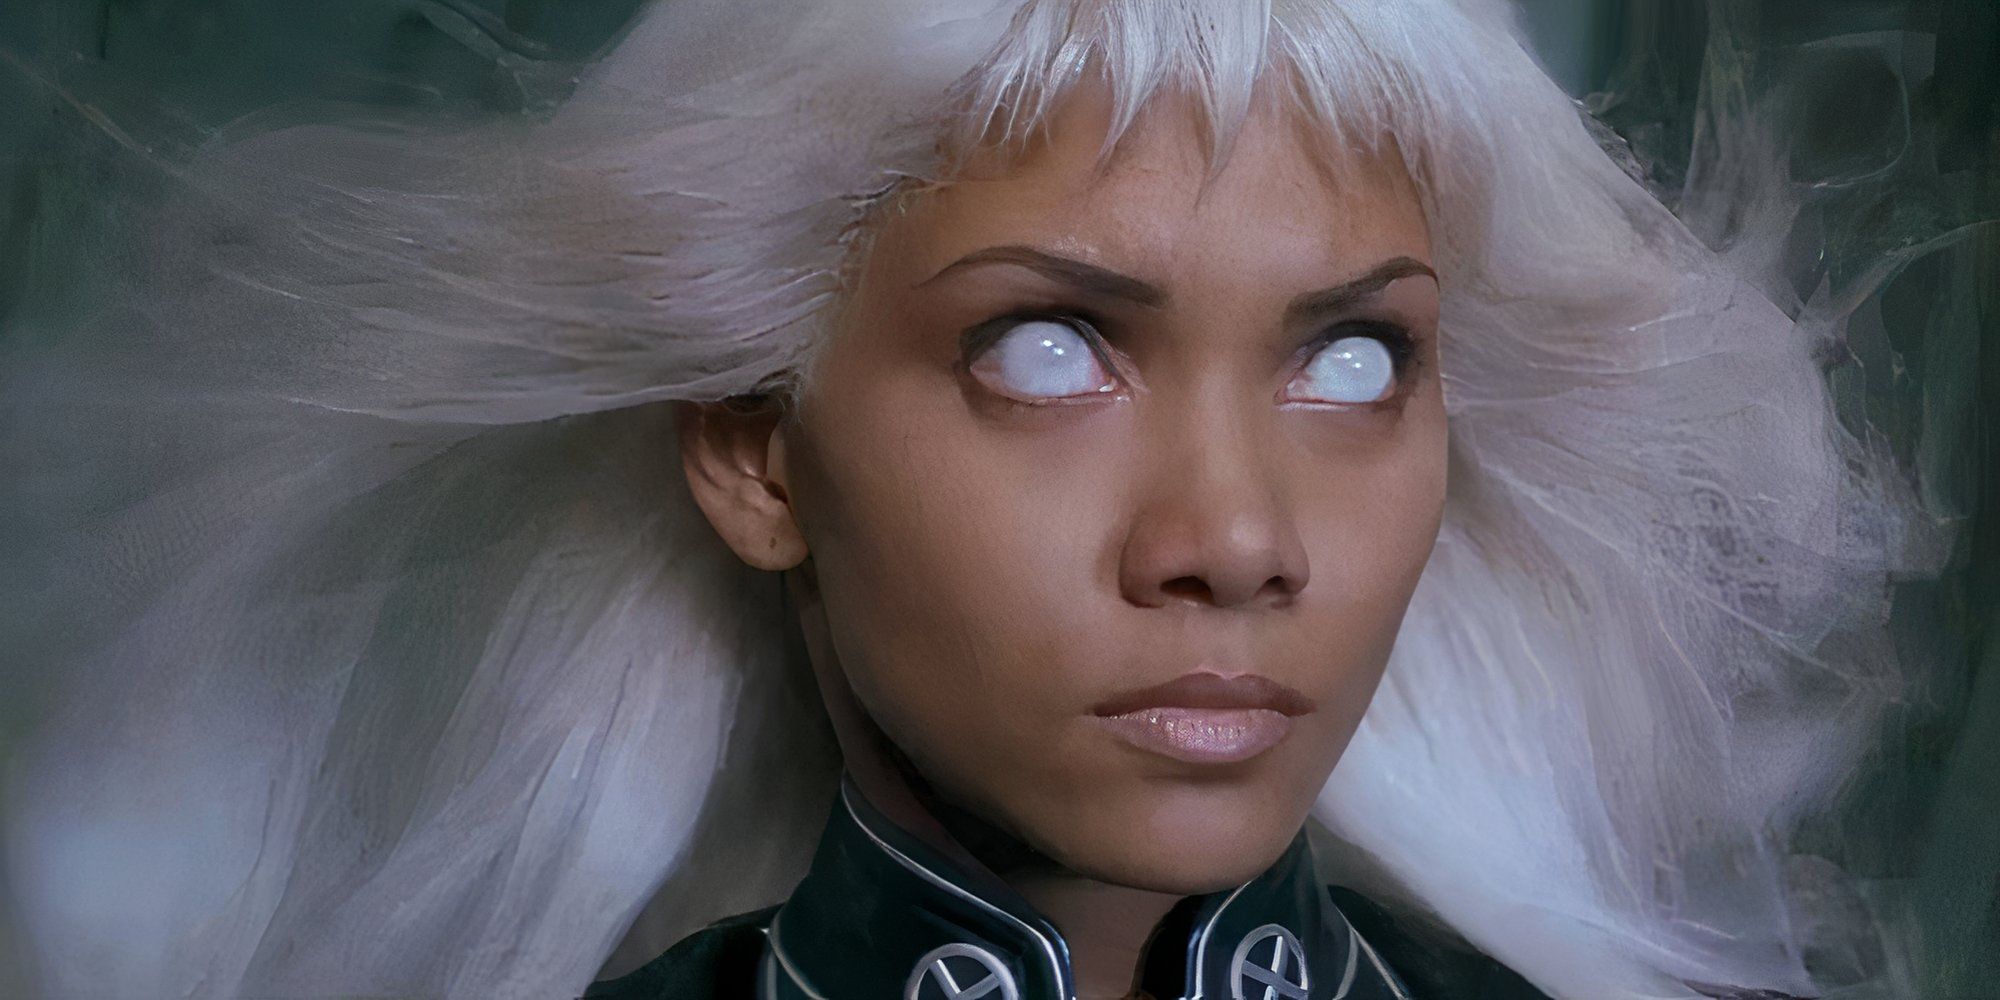 Storm with glowing white eyes and wind on her face in X-Men.